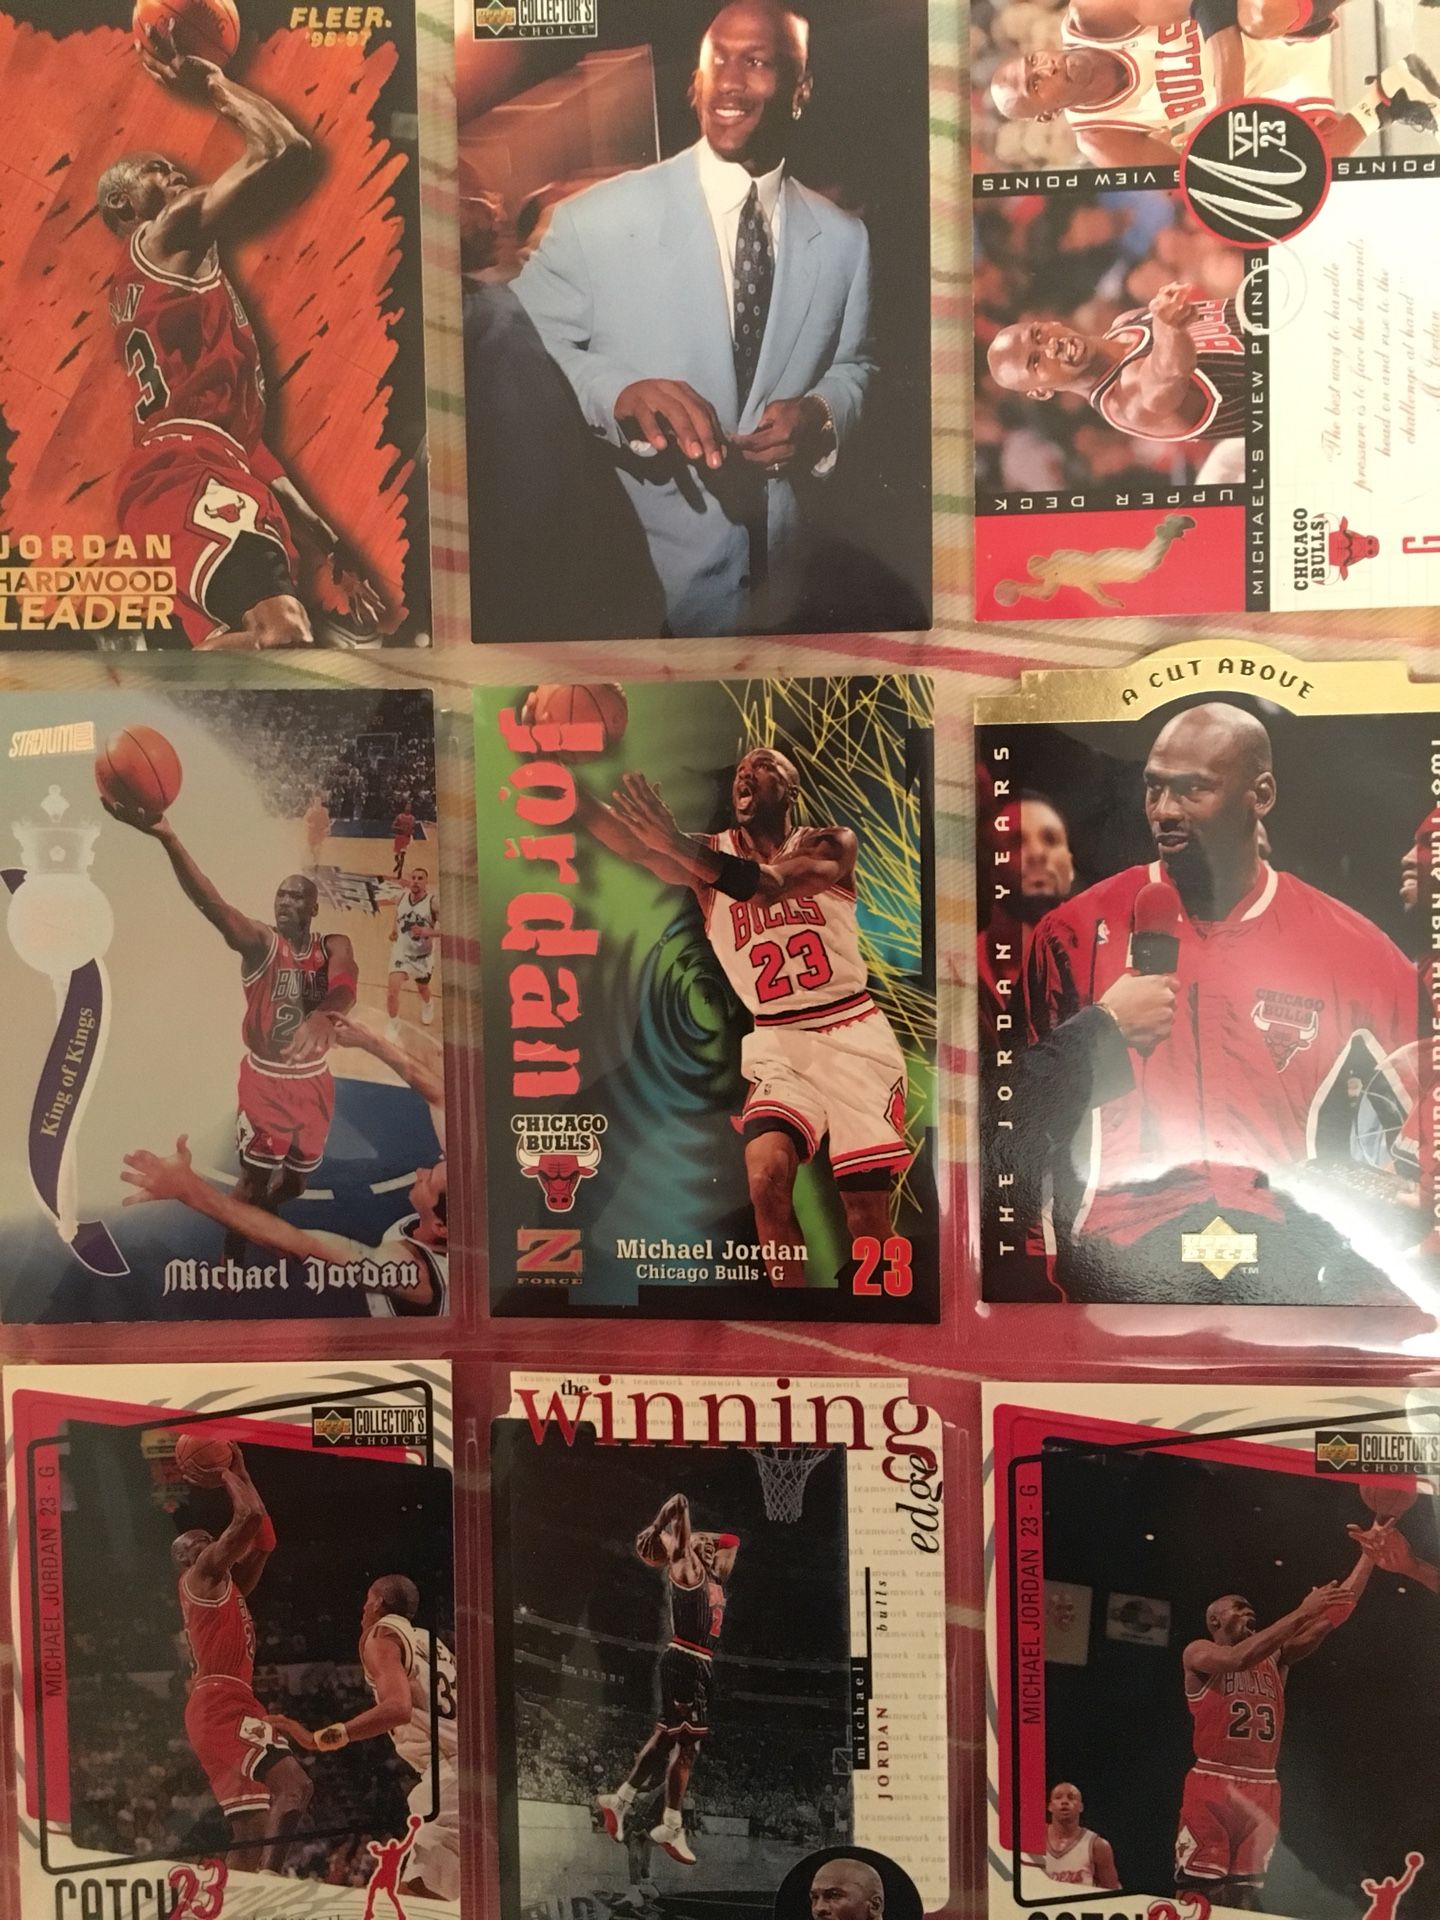 Basketball Card Collection for sale!!! Amazing and valuable cards/rare sets!! Michael Jordan, Signed Hawks, Shaq, Magic Johnson and so much more!!